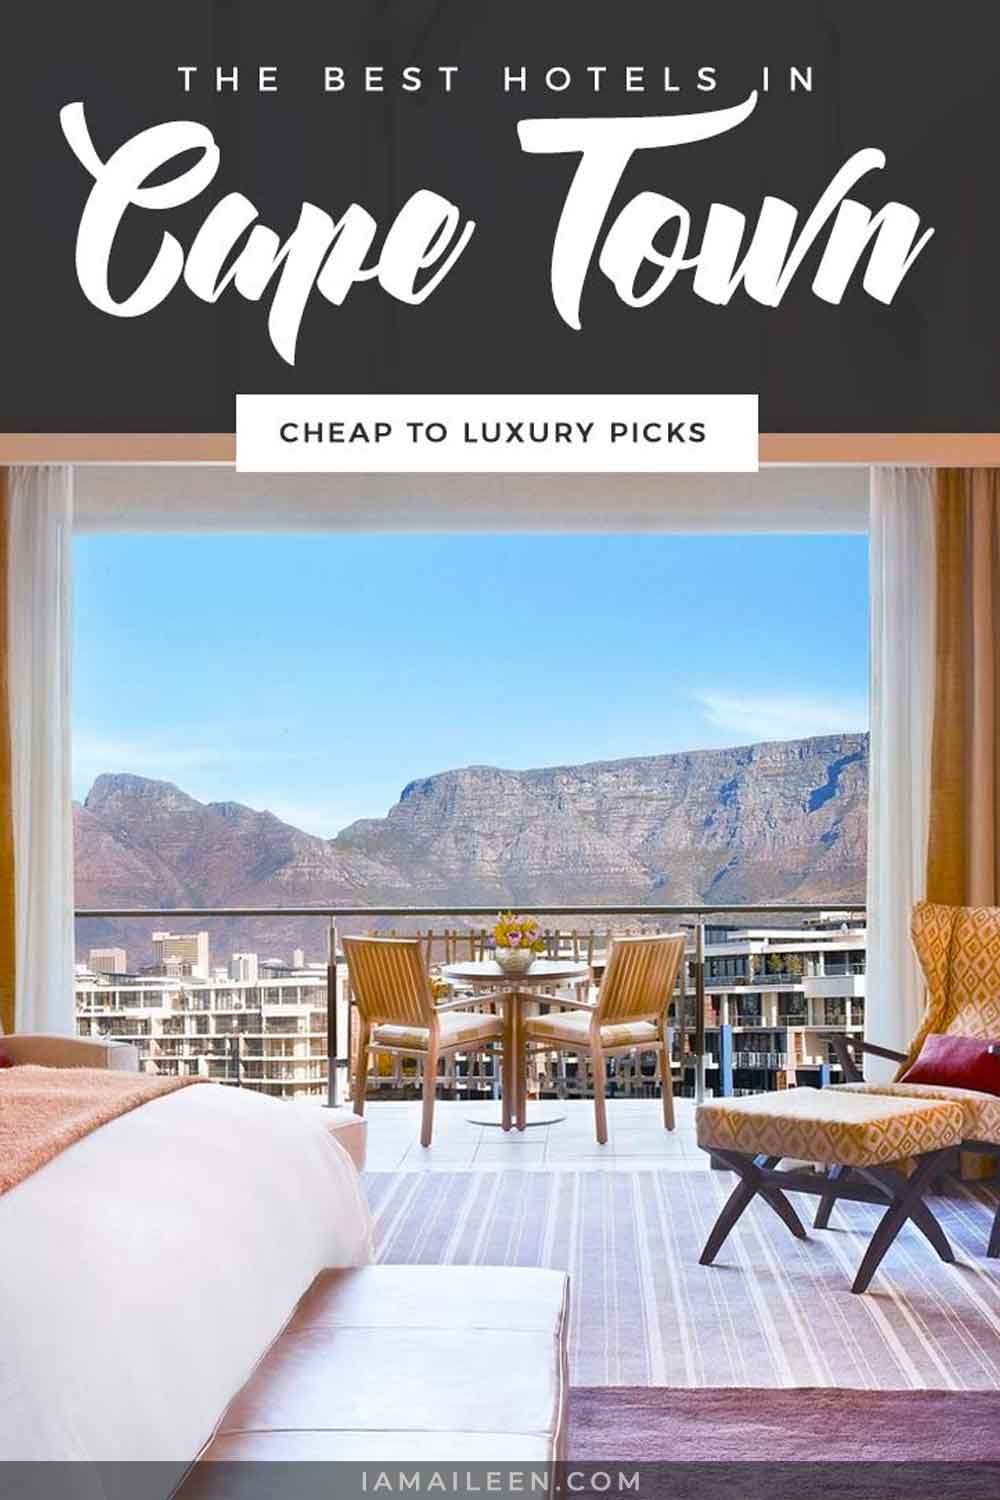 The Best Hotels in Cape Town, South Africa: Cheap to Luxury Picks